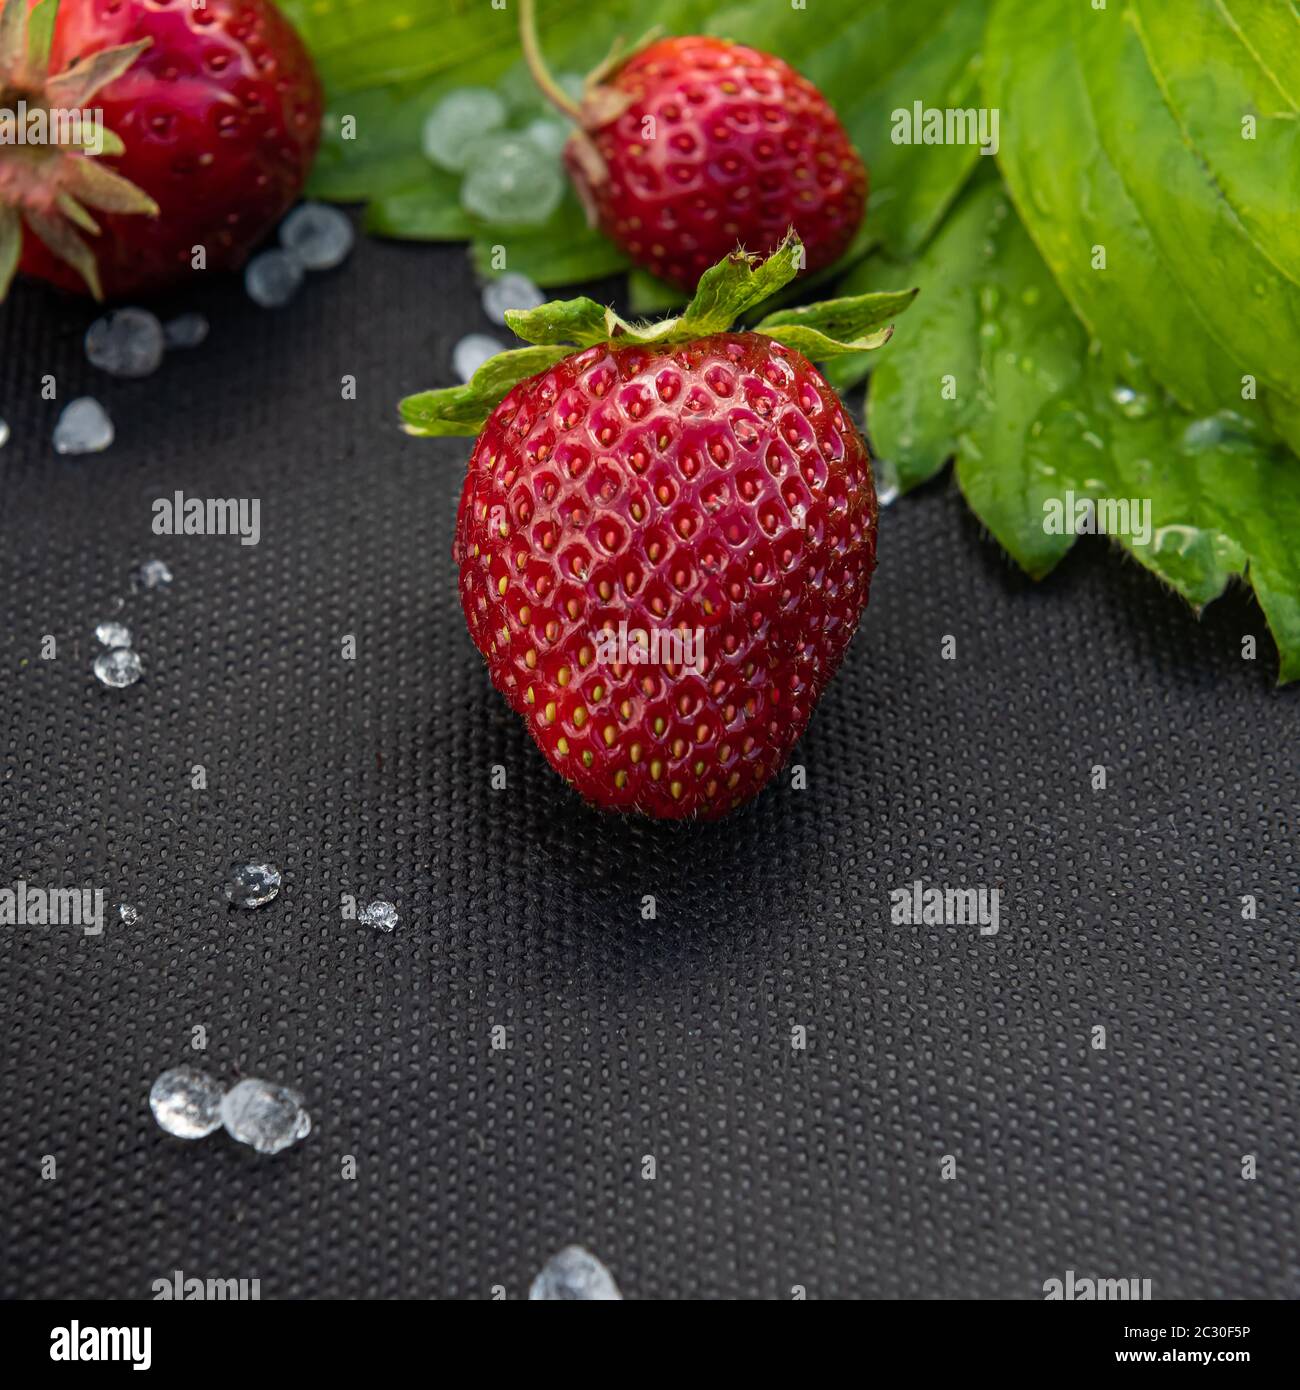 Close-up of organic red strawberries with few white hailstones and leaf on black material used for cultivating this berry in garden. Square background Stock Photo